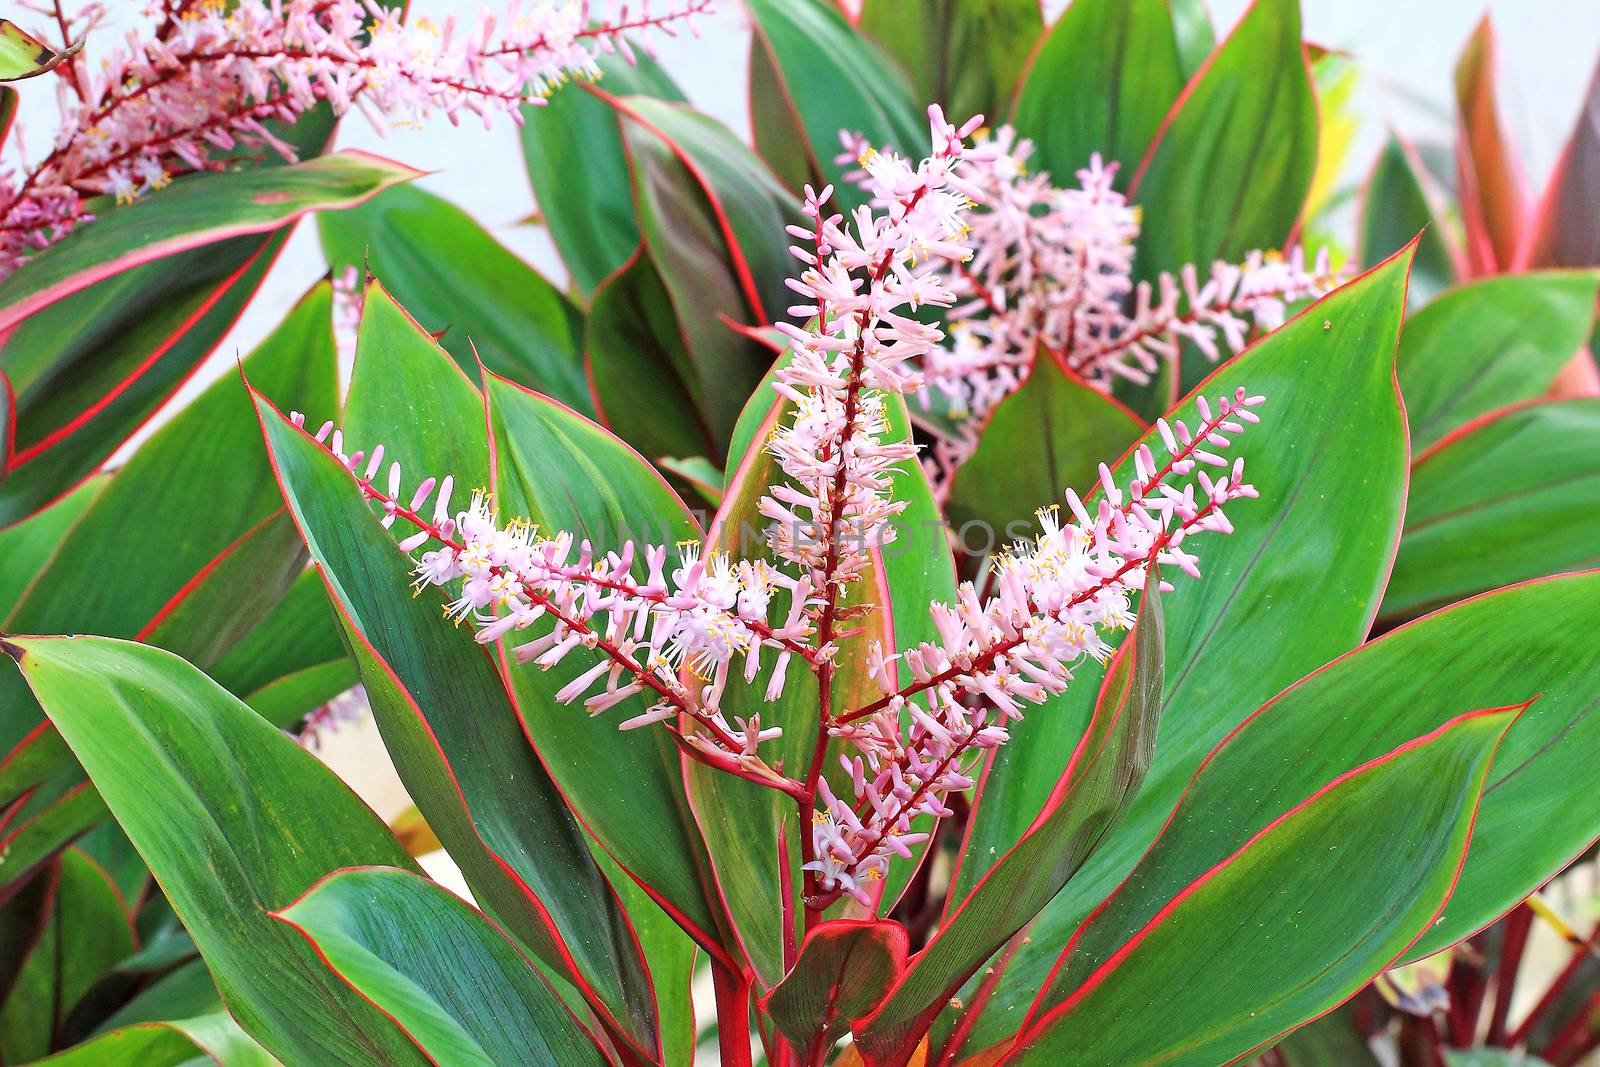 Pink flowers blooming on plant